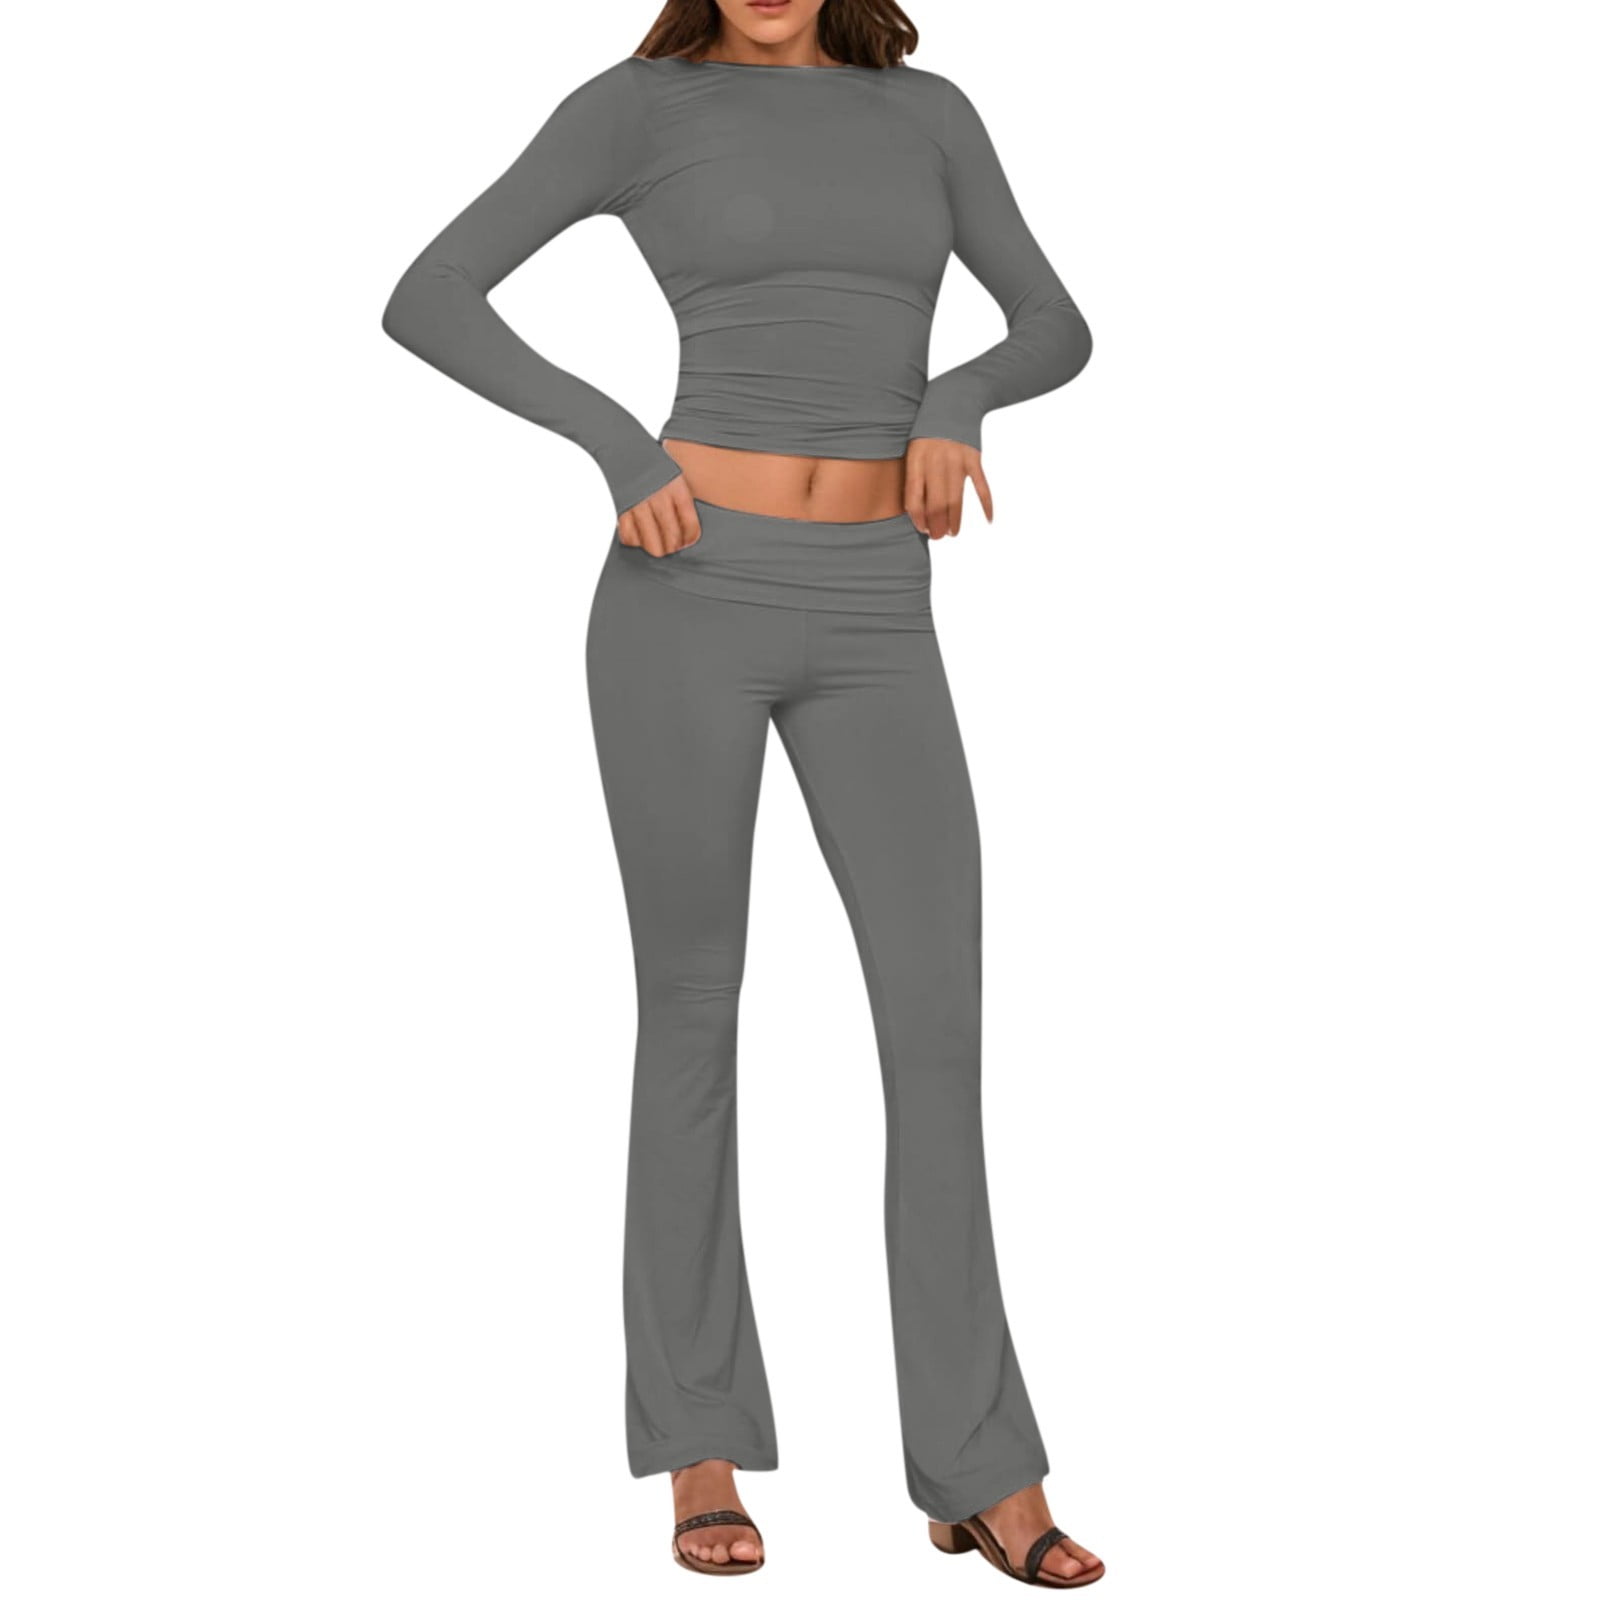  MAYZIA Women's 2 Piece Lounge Sets Fold-over Flare Pants Set Yoga  Leggings Tracksuit Casual Outfits XS-3XL (Light-Gray, Small) : Clothing,  Shoes & Jewelry